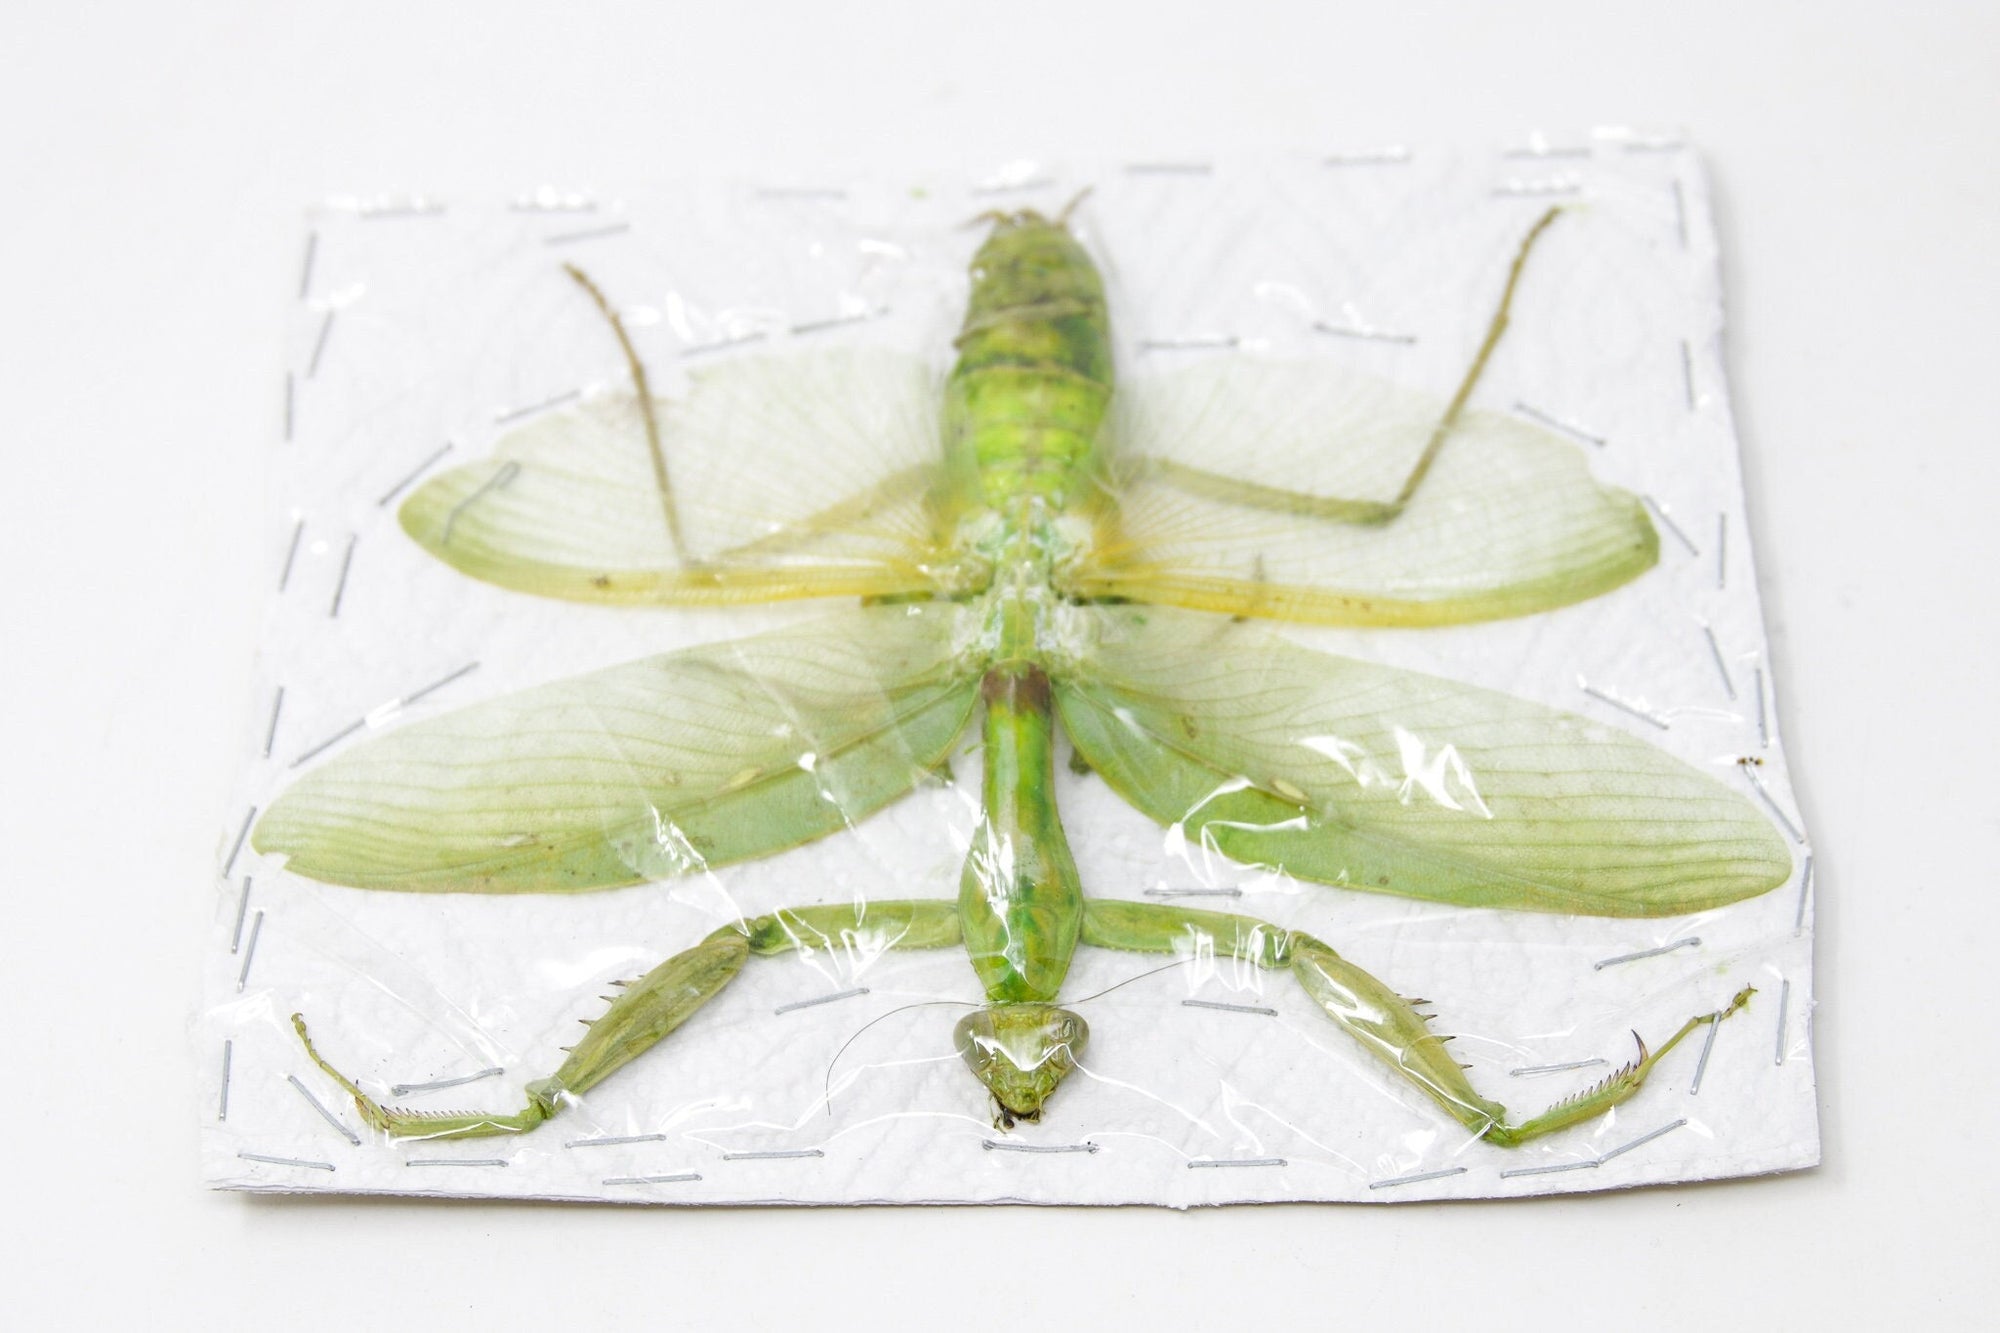 Insect Specimen from Thailand 2021 Green Mantis (A-/A2 Imperfect Specimen)